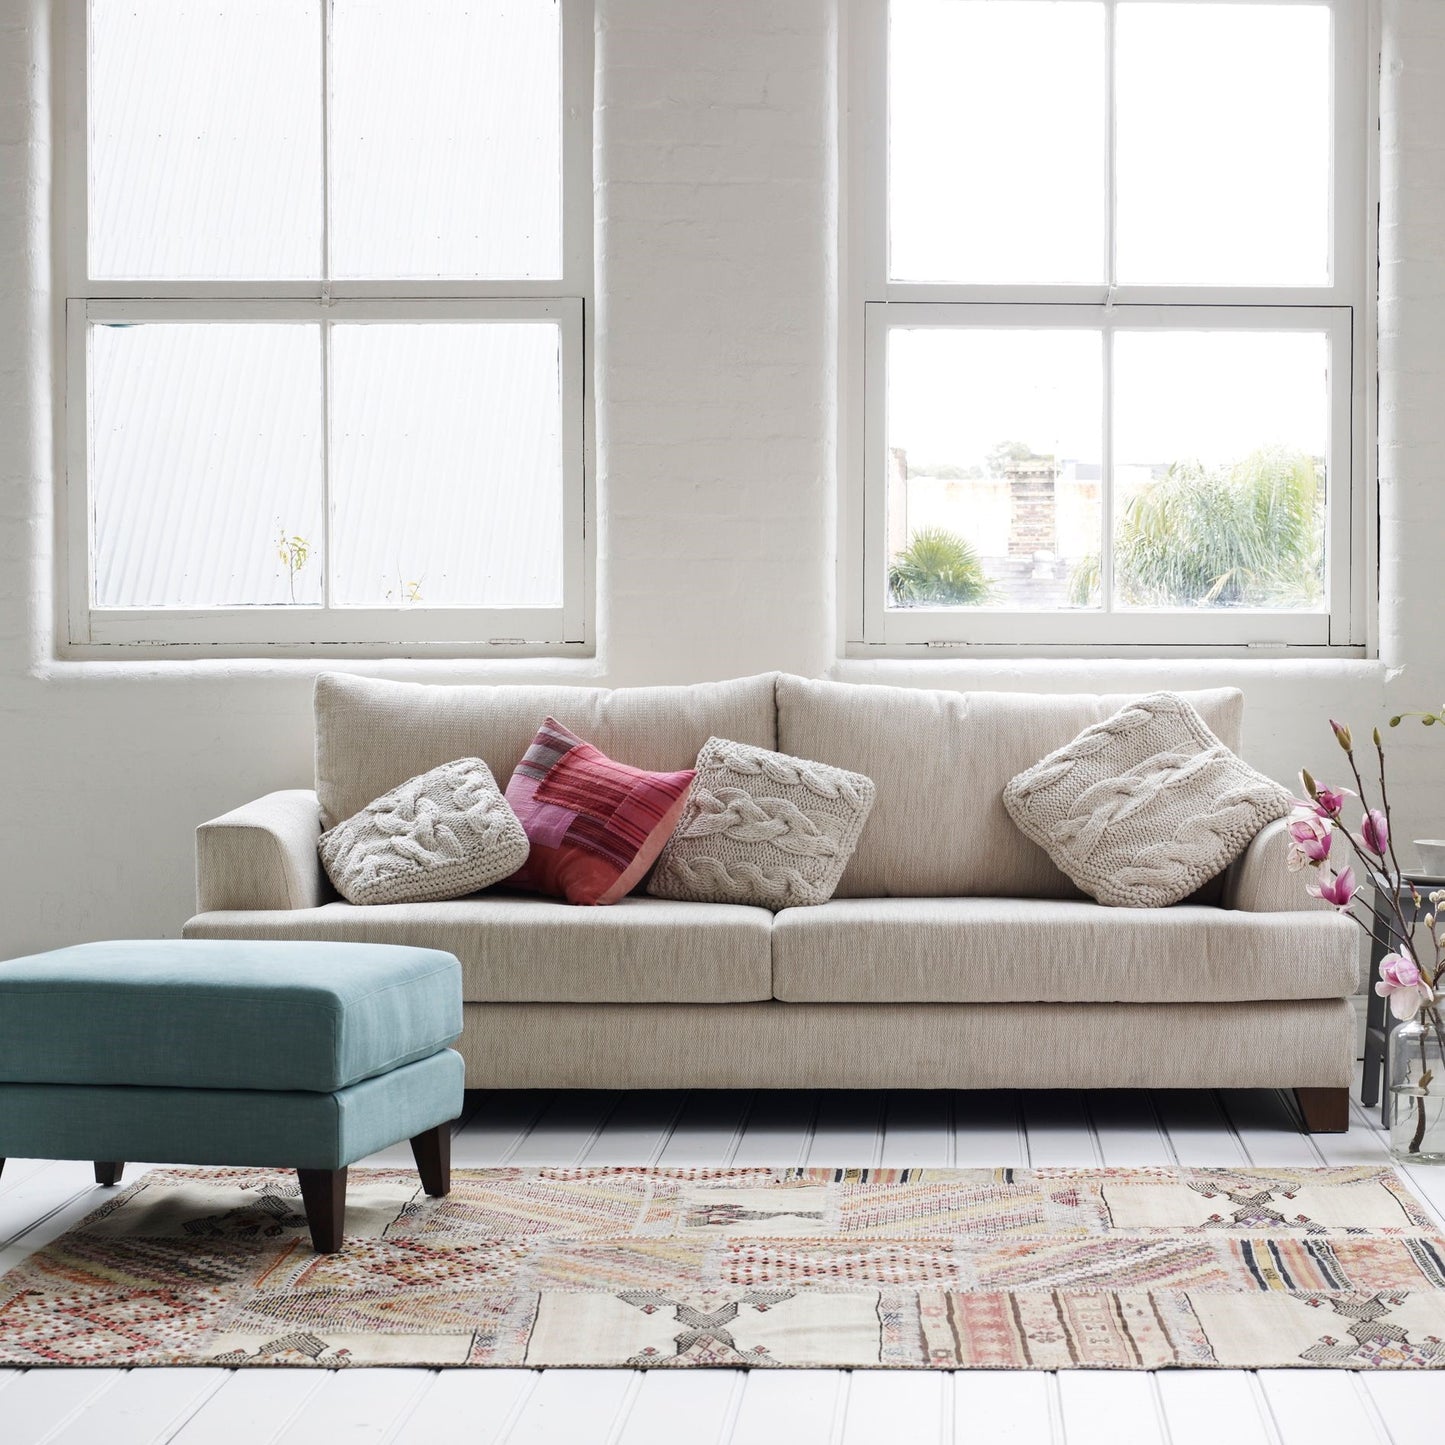 Kirby Sofa by Molmic available from Make Your House A Home, Furniture Store located in Bendigo, Victoria. Australian Made in Melbourne. Benny Sofa Molmic.